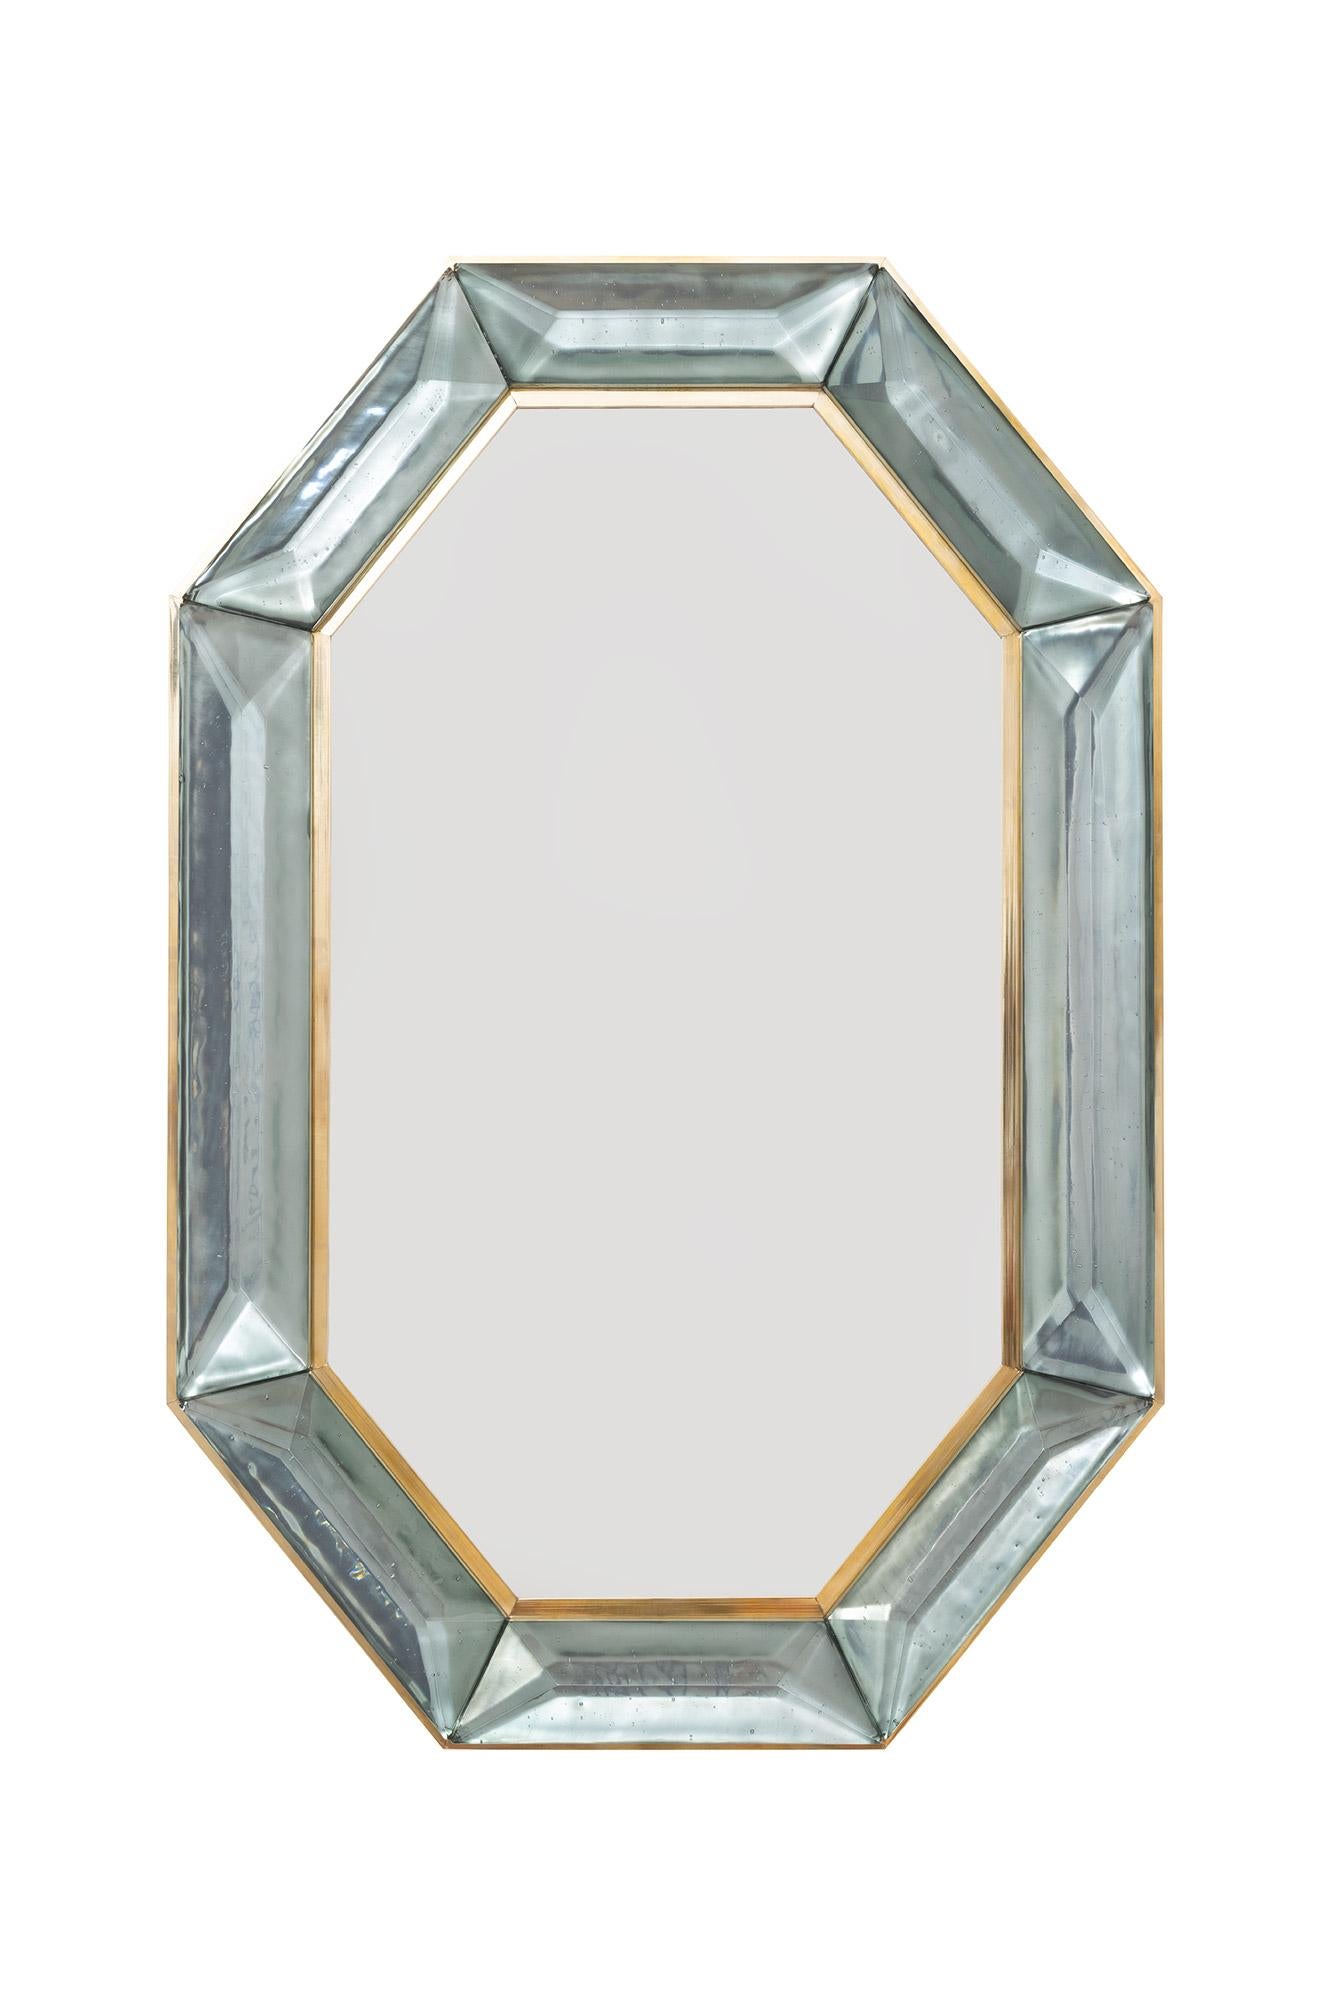 Pair of bespoke octagon sea green Murano glass mirrors, in stock
Vivid and intense sea green glass block with naturally occurring air inclusions throughout
Highly polished faceted pattern
Brass gallery all around
Each mirror is a unique luxury